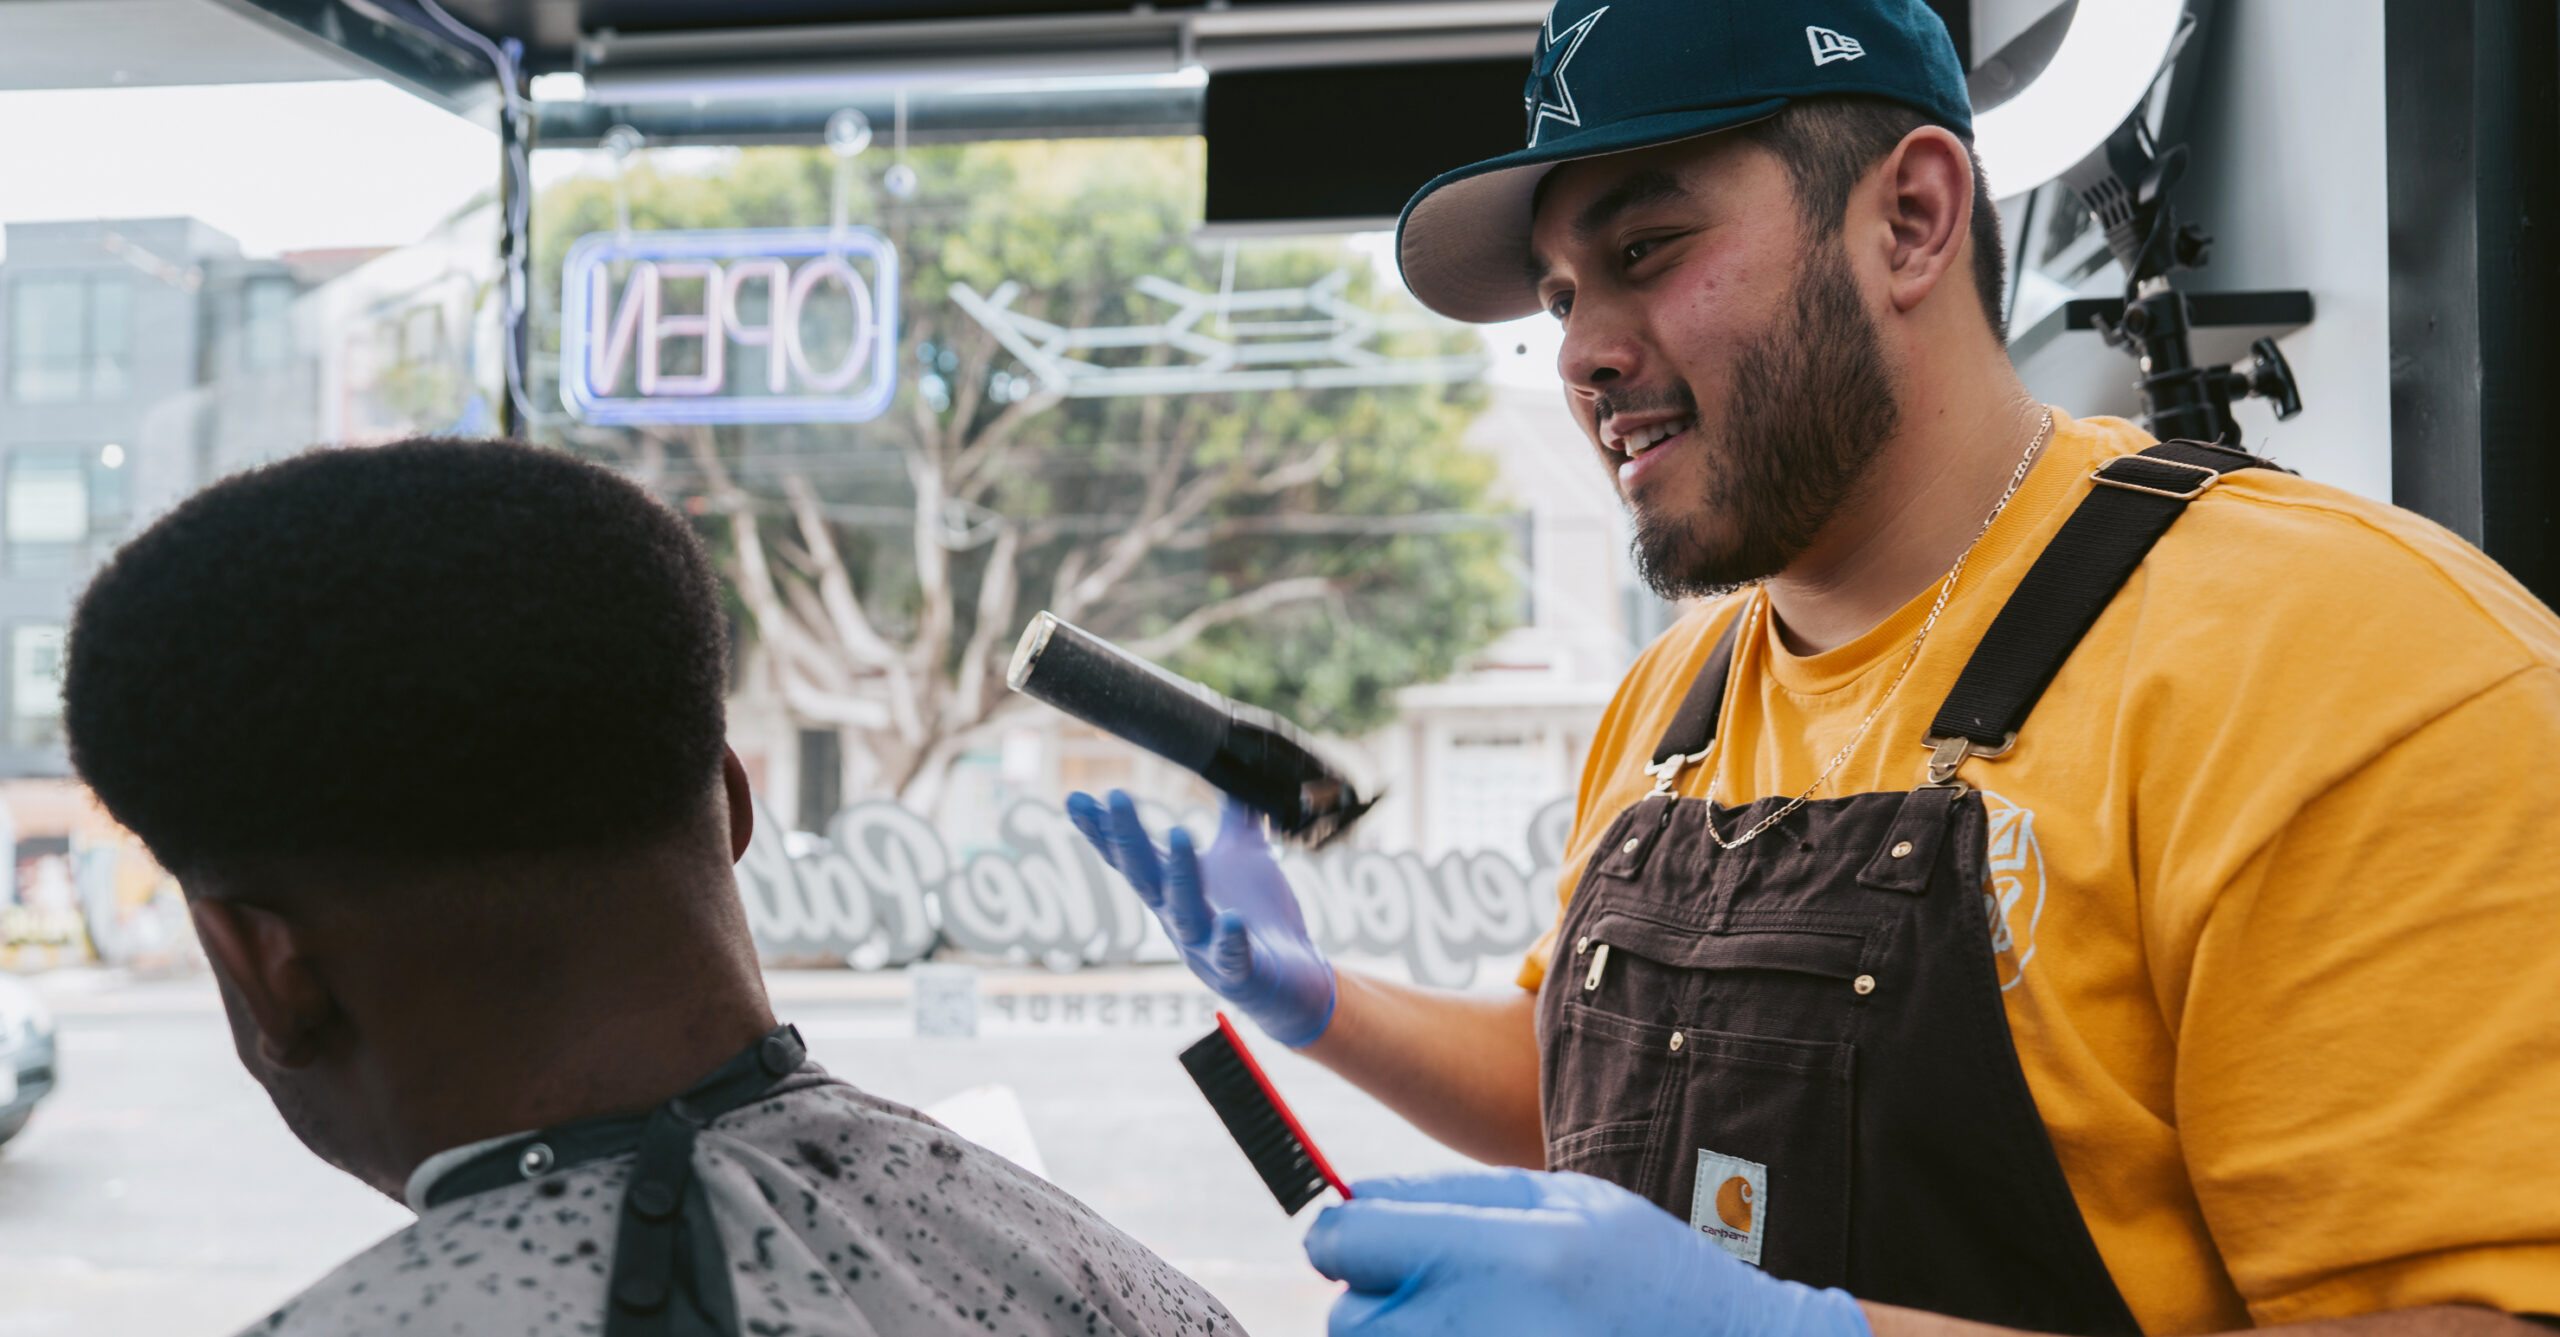 Drink Free Beer in Silence at This New San Francisco Barbershop